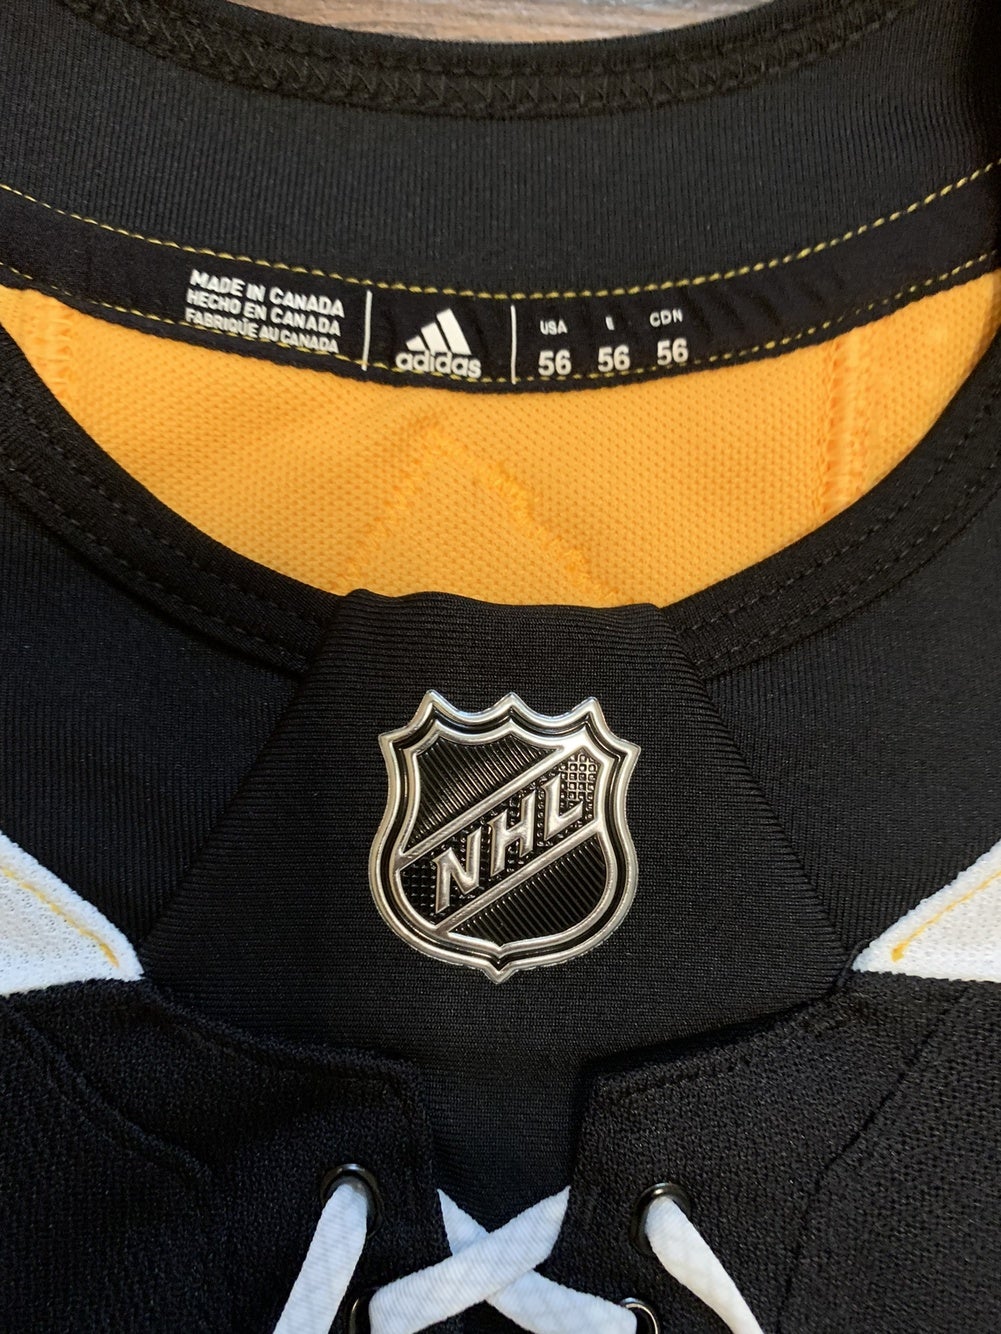 SOLD) Boston Bruins MIC Adidas Practice Jerseys with Sponsor Patches -  Jerseys, Socks & Apparel - For Sale - Pro Stock Hockey 